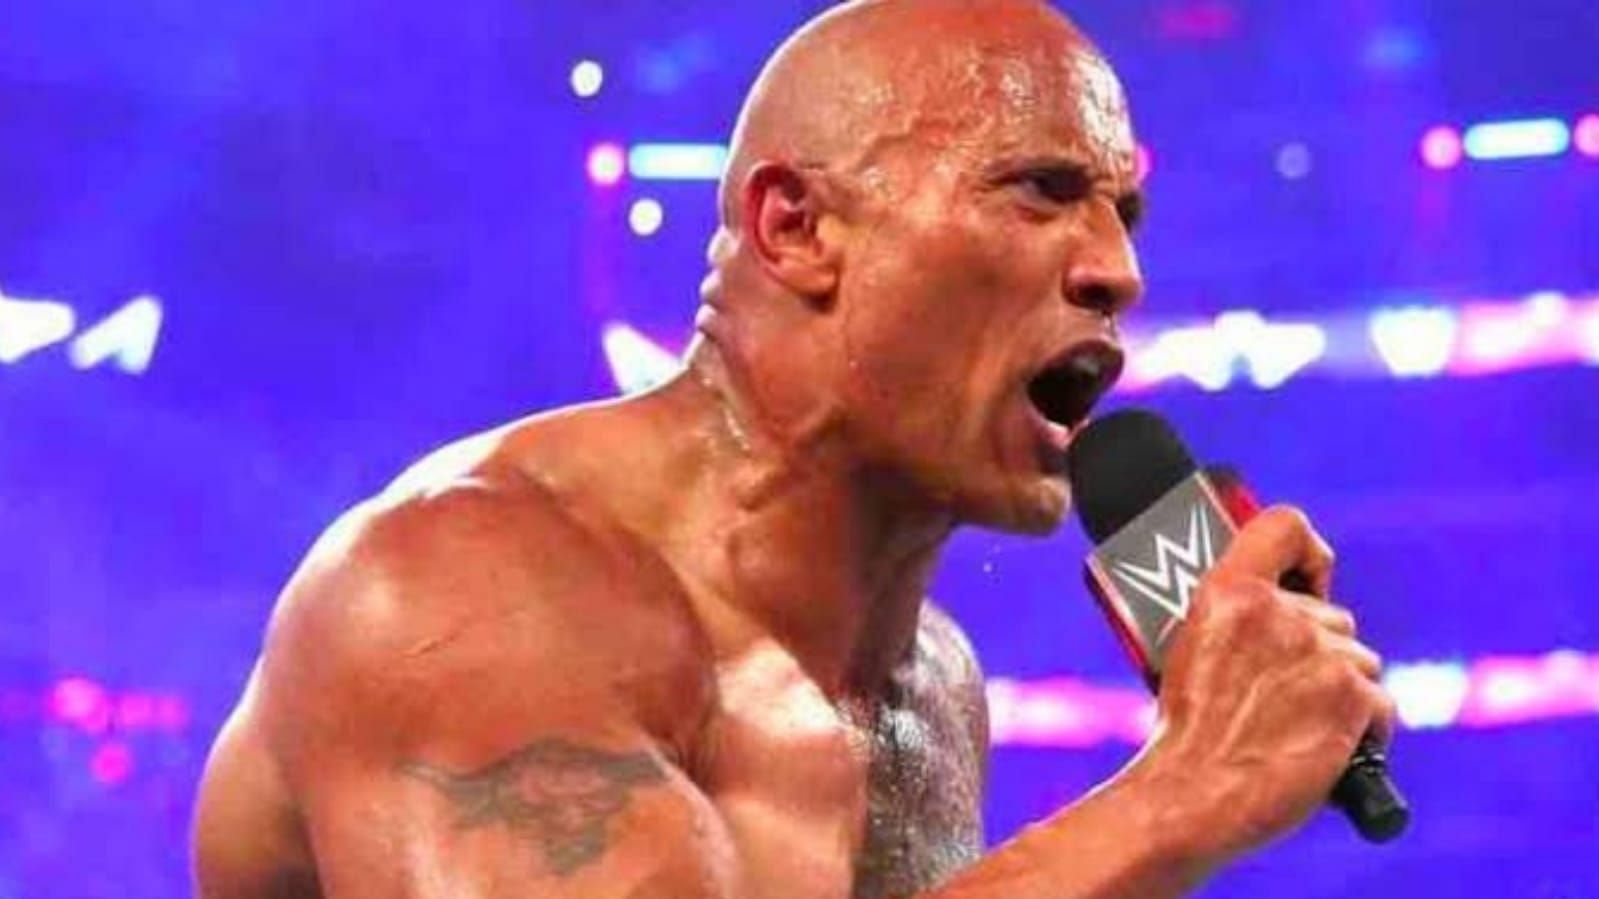 The Rock celebrated 25 years of his wrestling journey